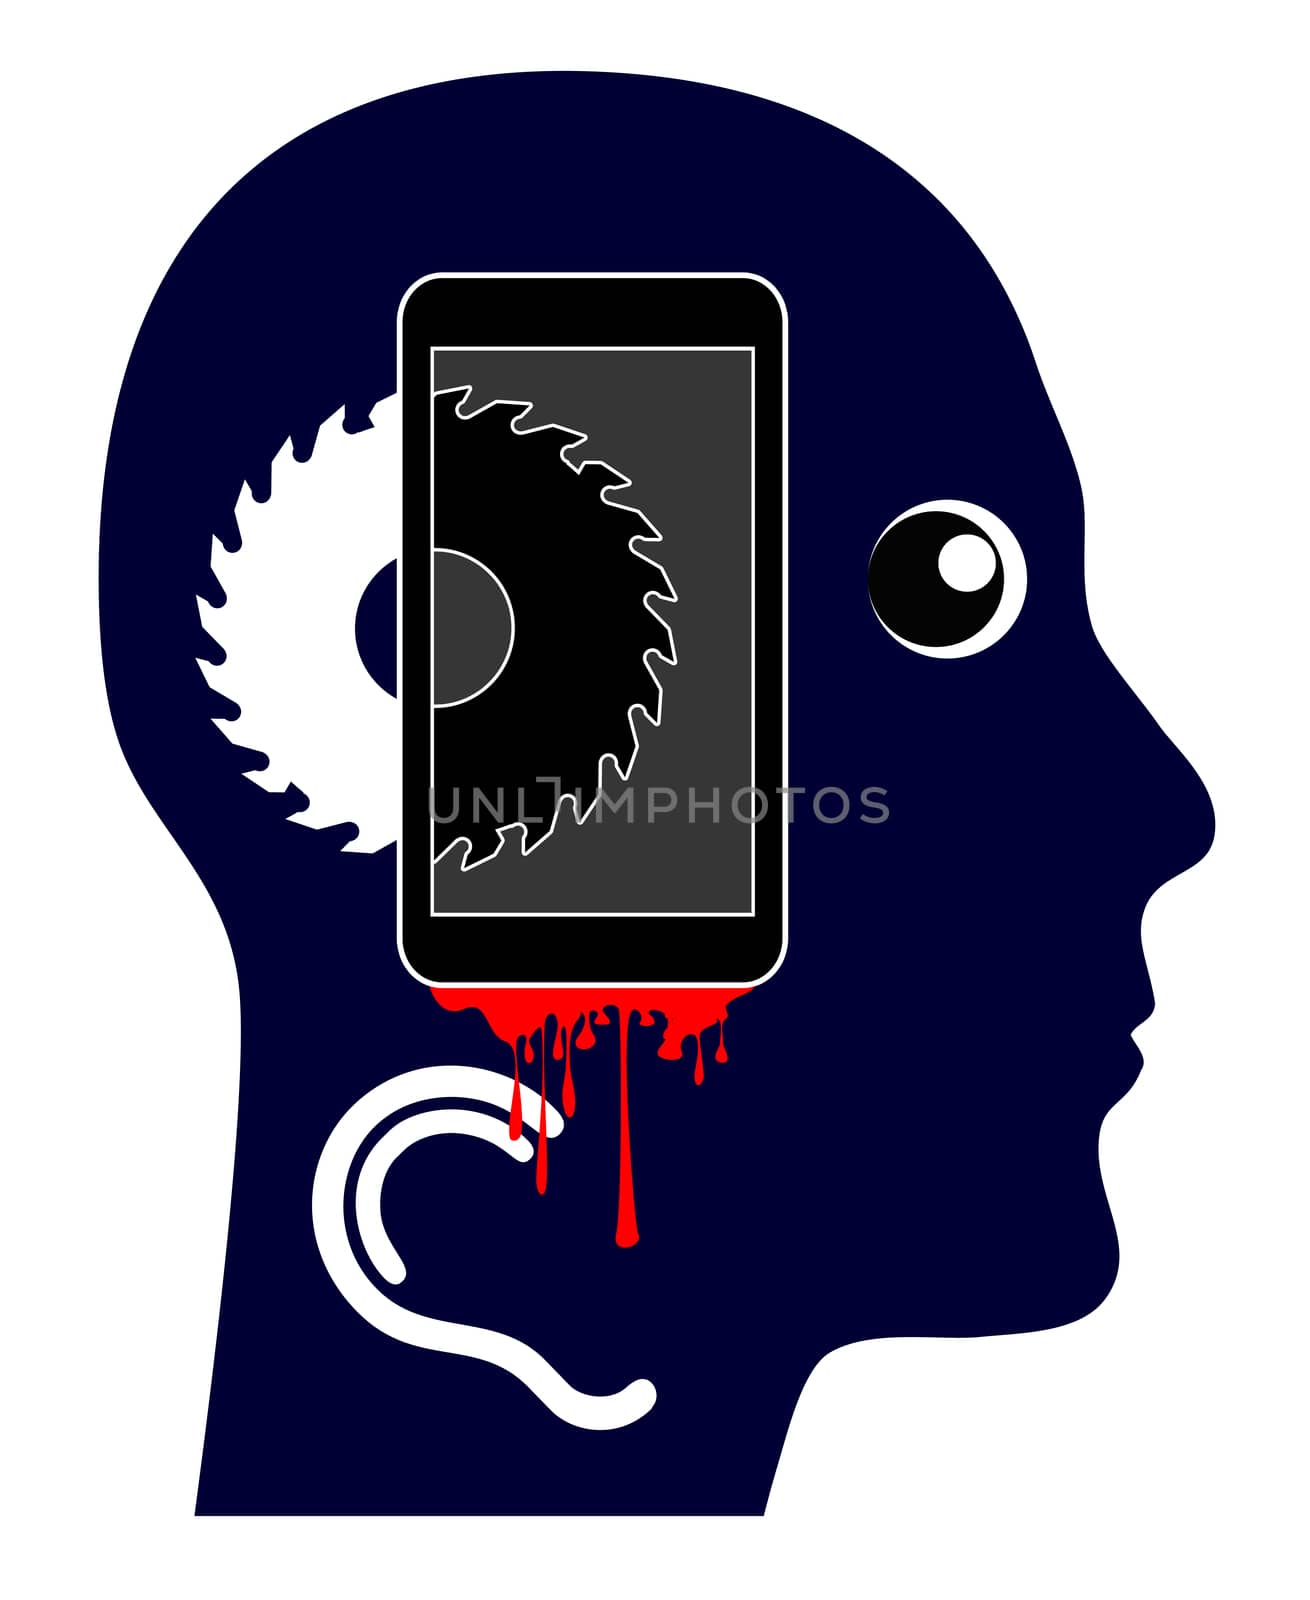 Satirical concept sign of person who gets hurt by the use of cellphone